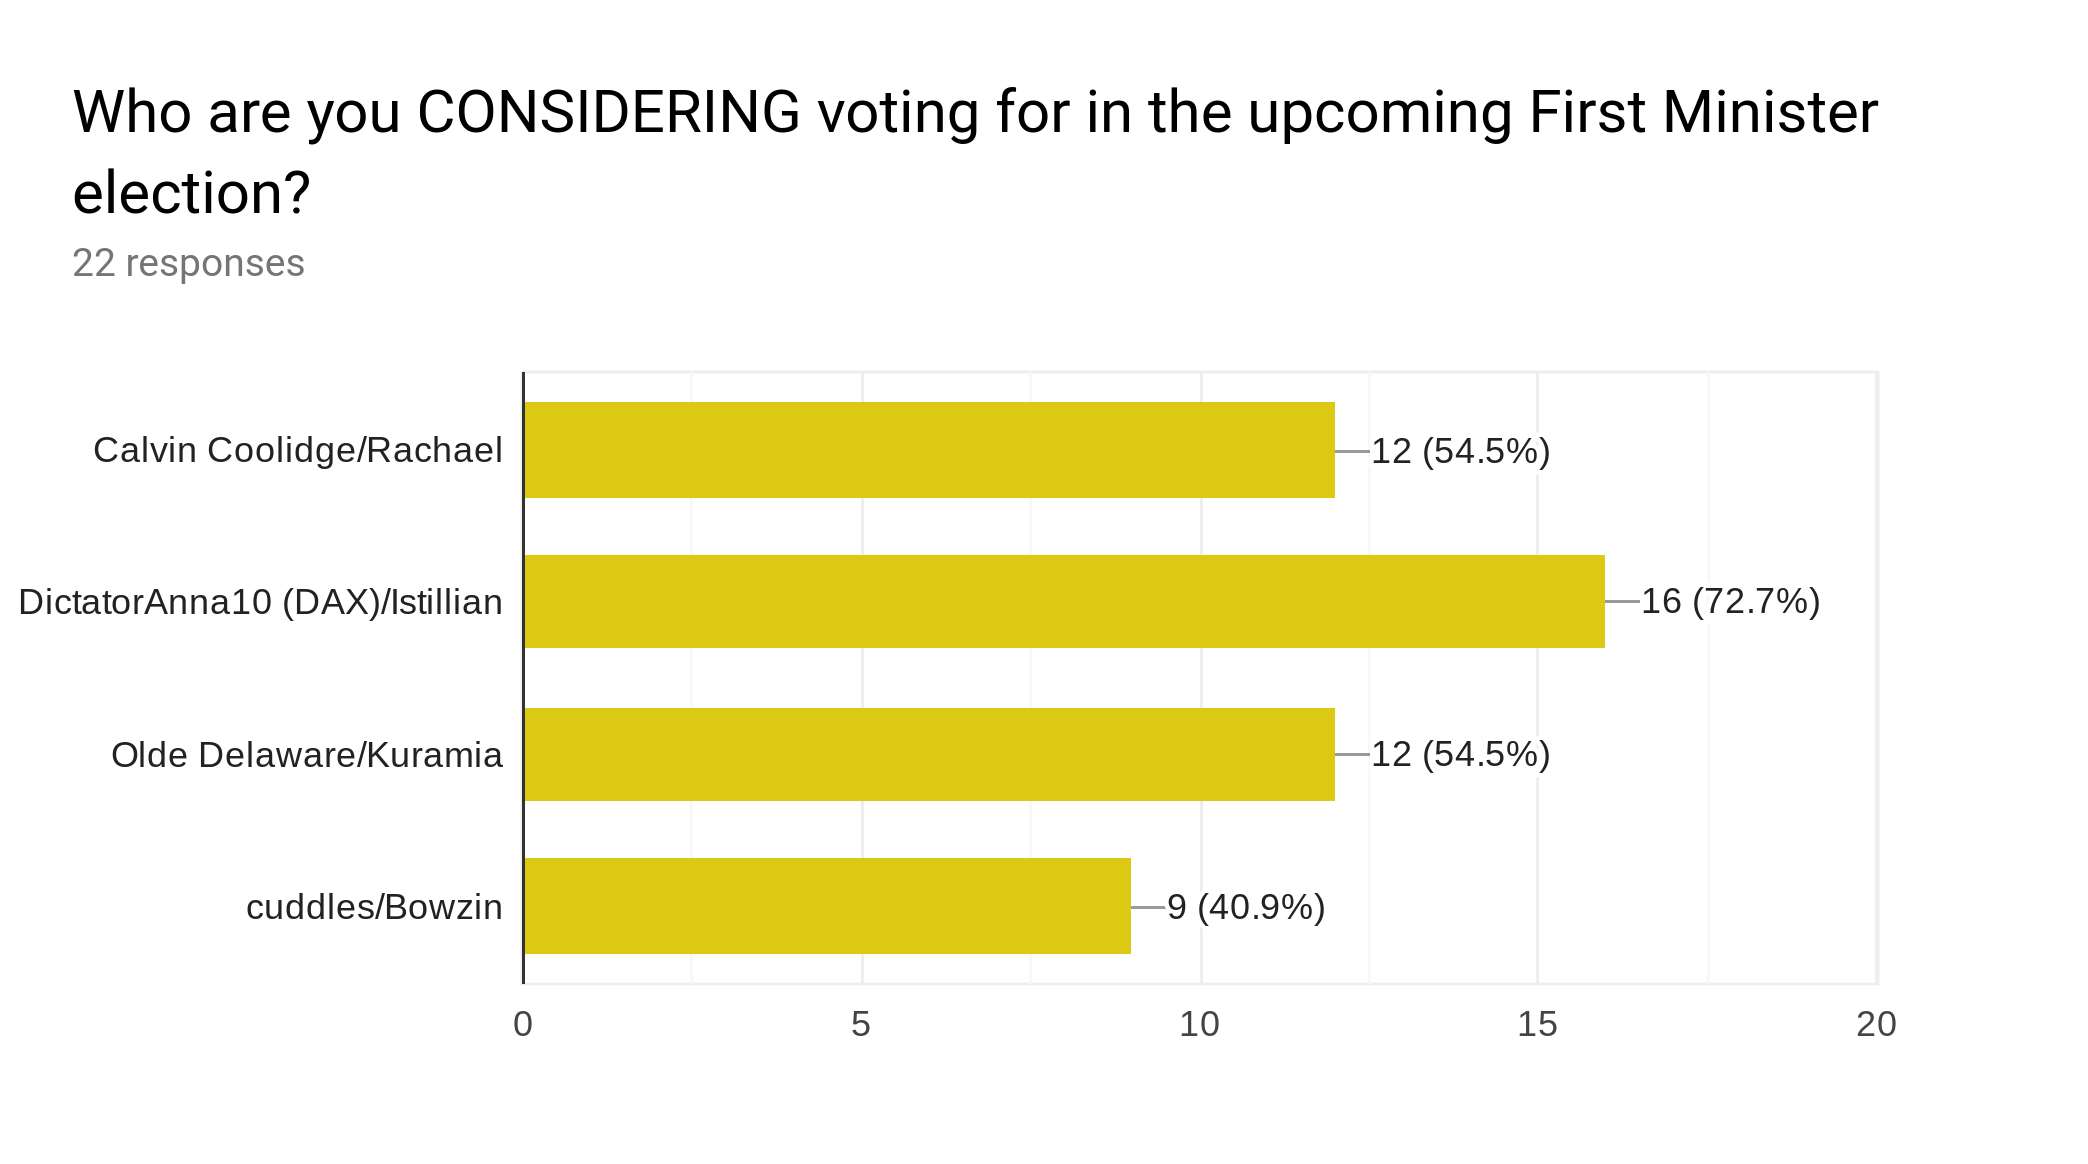 Forms response chart. Question title: Who are you CONSIDERING voting for in the upcoming First Minister election?. Number of responses: 22 responses.